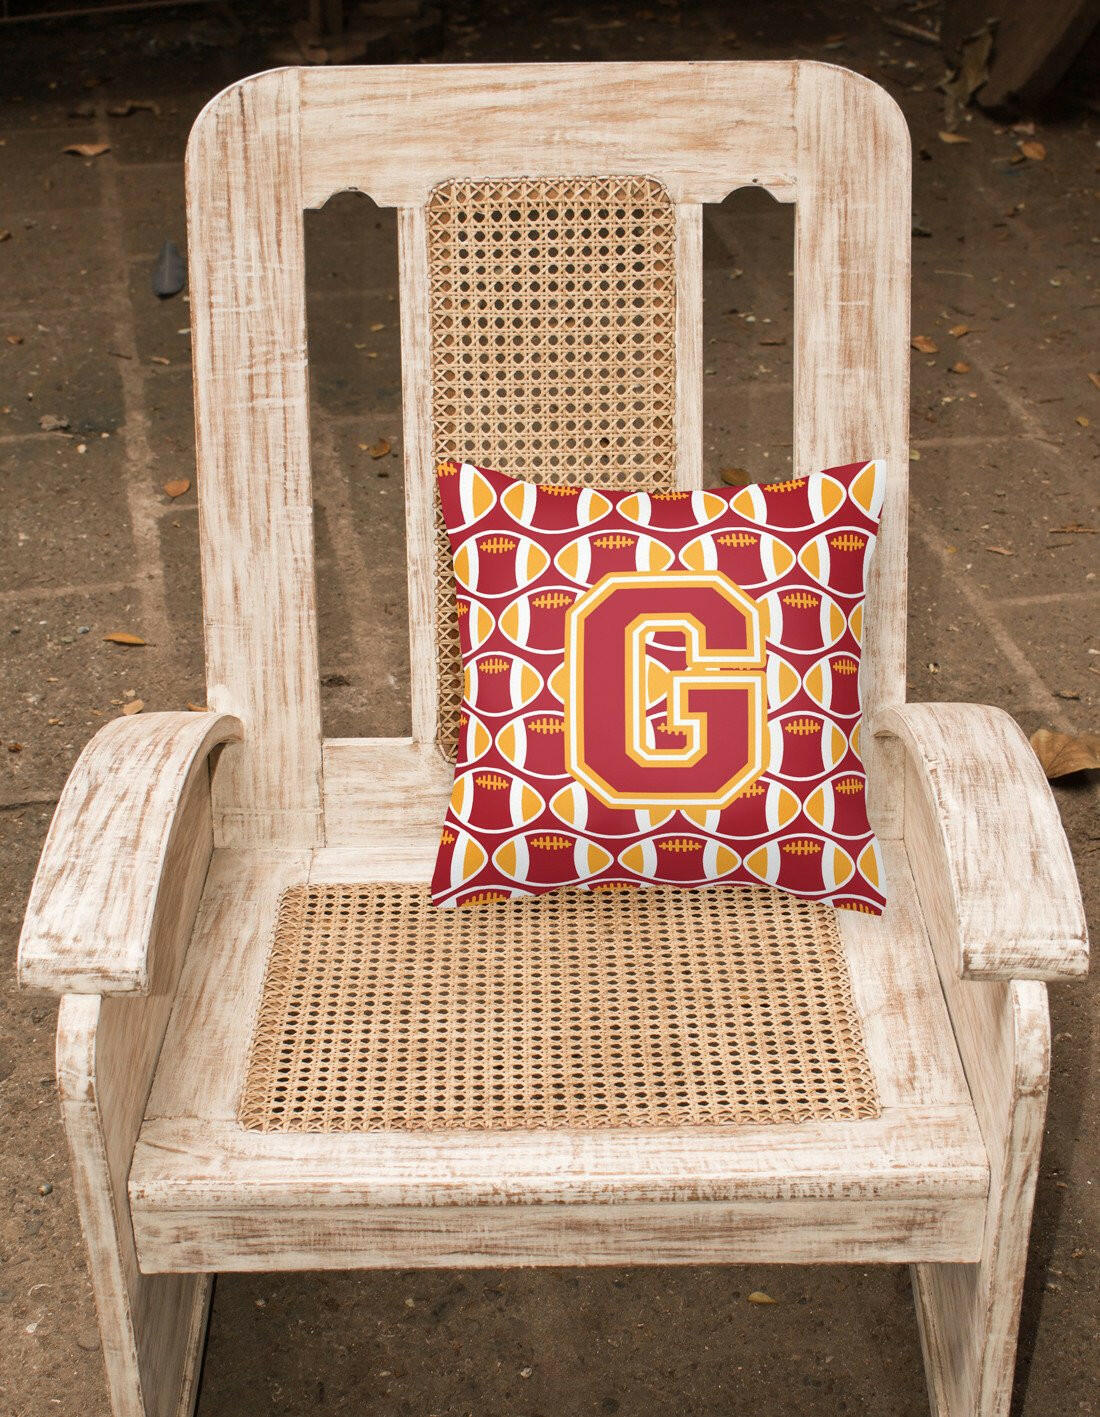 Letter G Football Cardinal and Gold Fabric Decorative Pillow CJ1070-GPW1414 by Caroline's Treasures